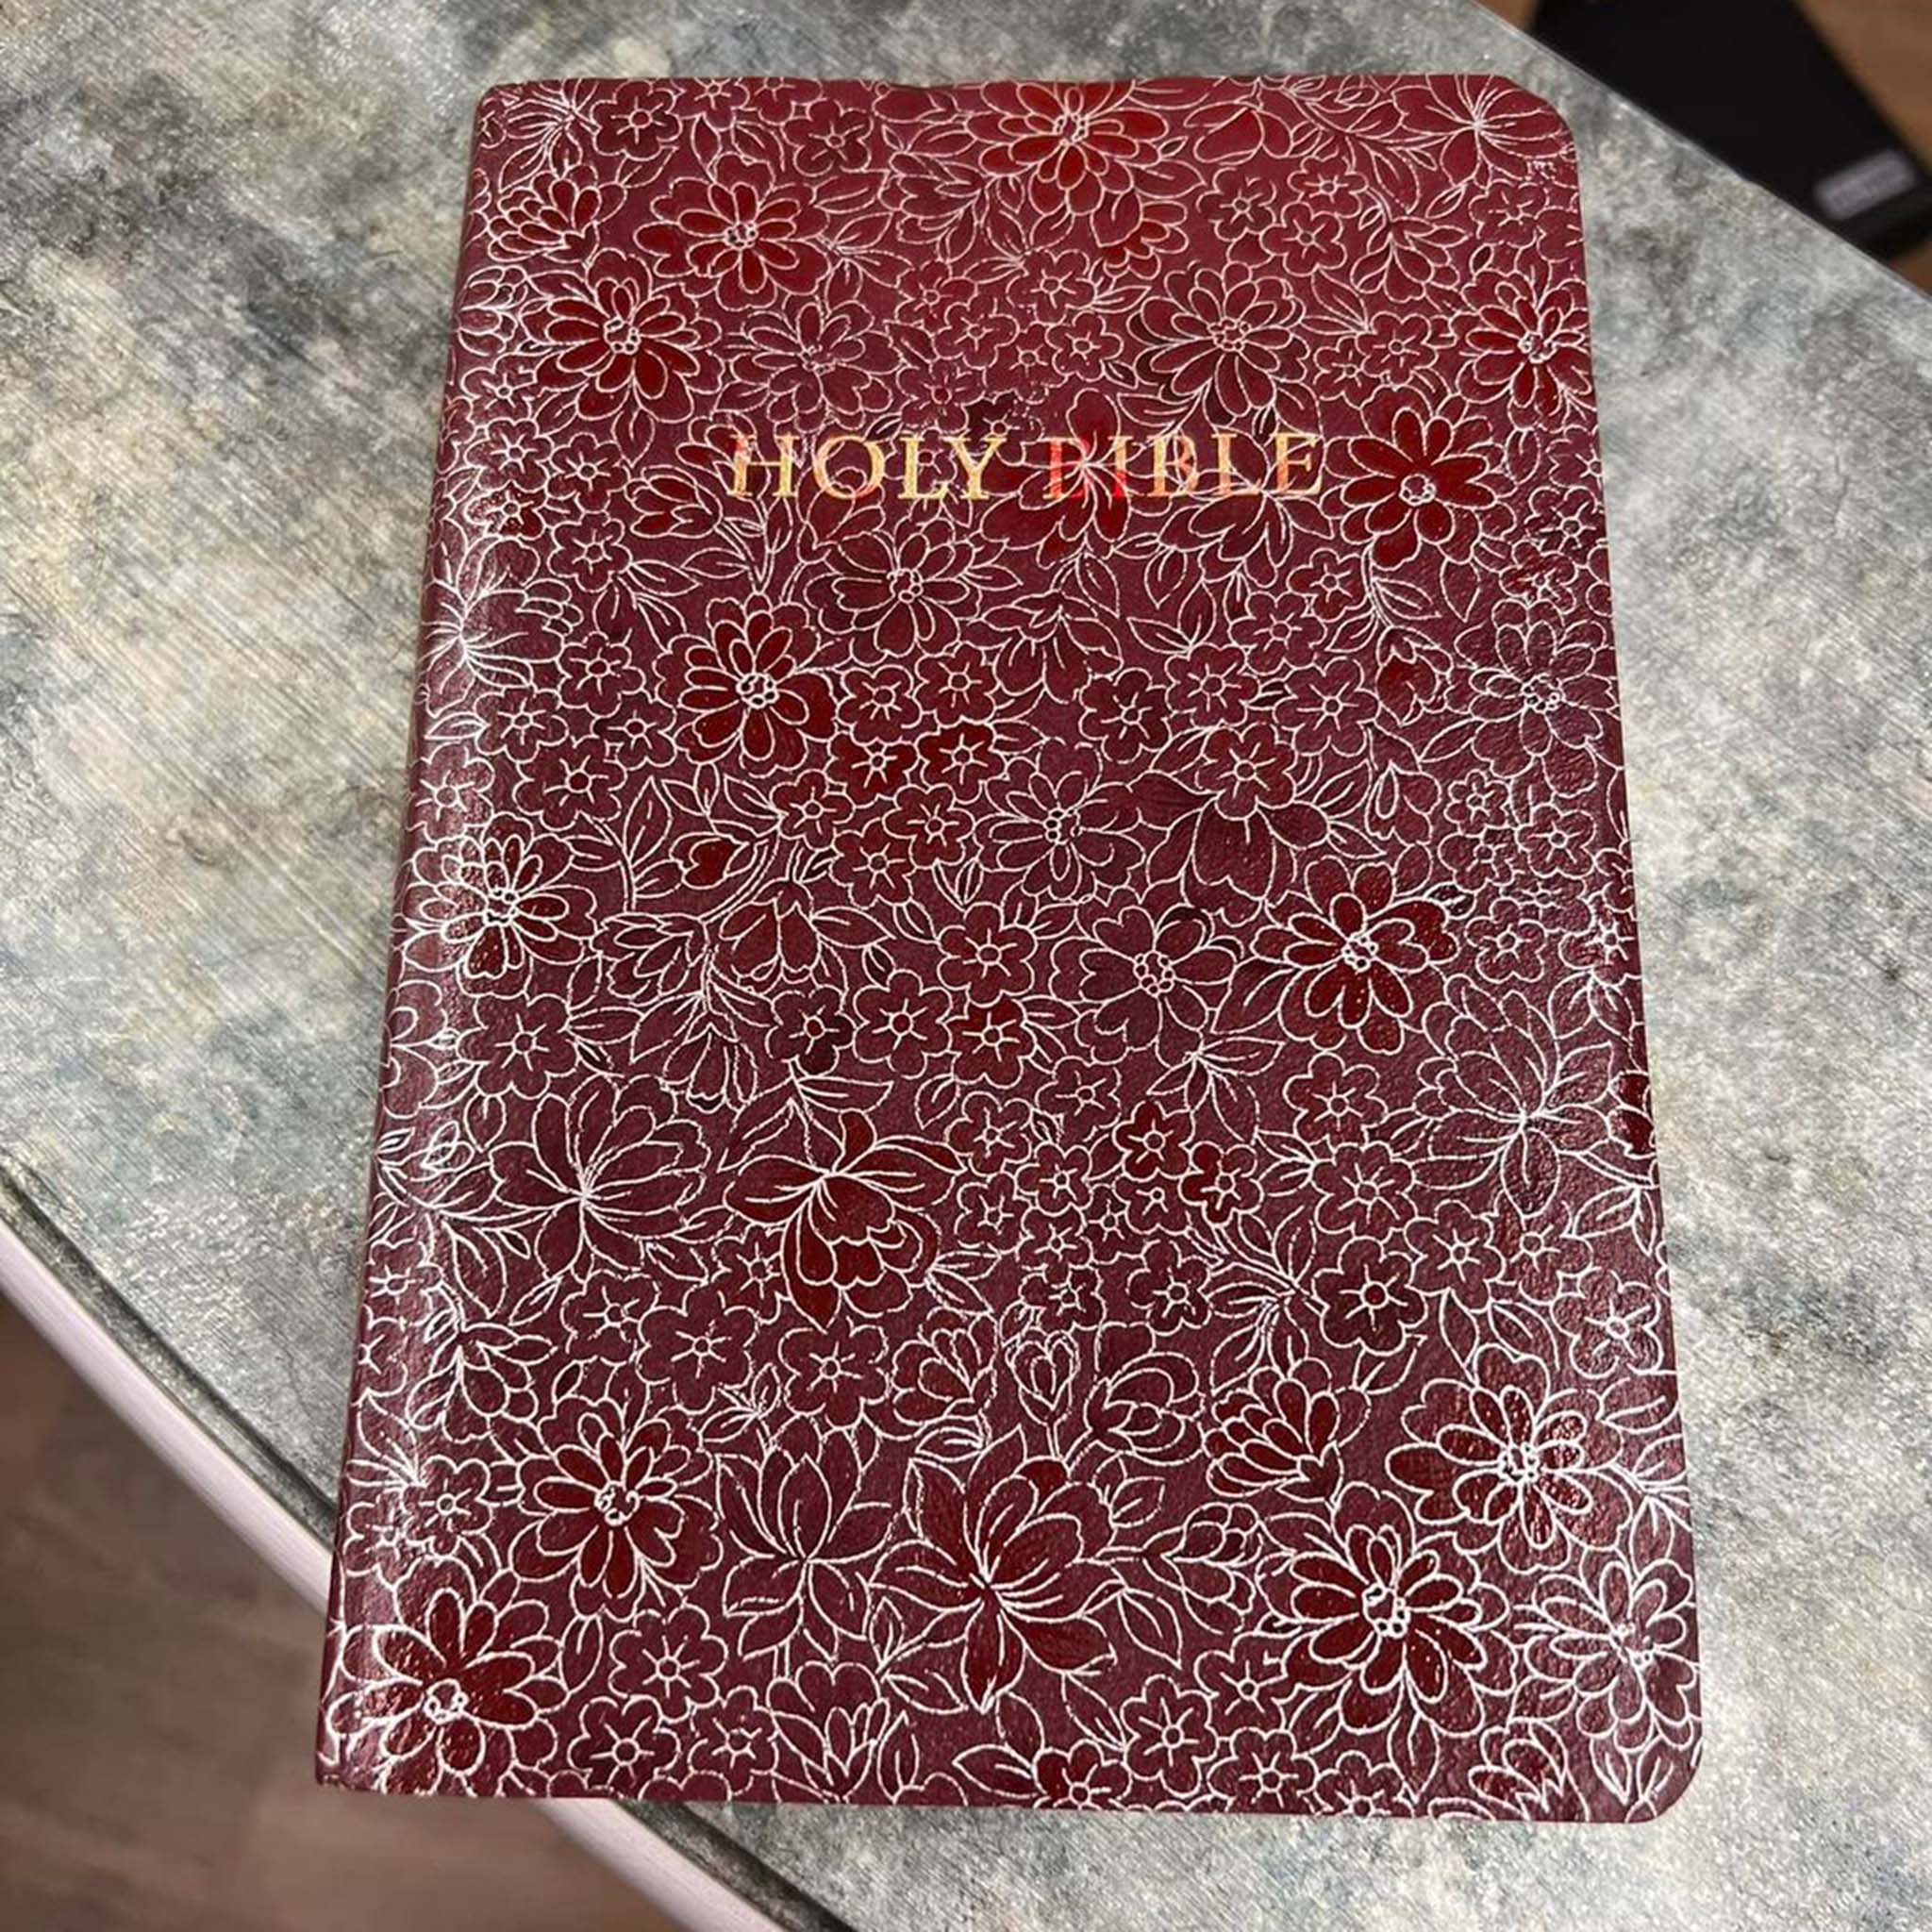 A red leather bound Holy Bible features Artistic Painting Studio's Ayva's Flowers metallic transfer foil on it.